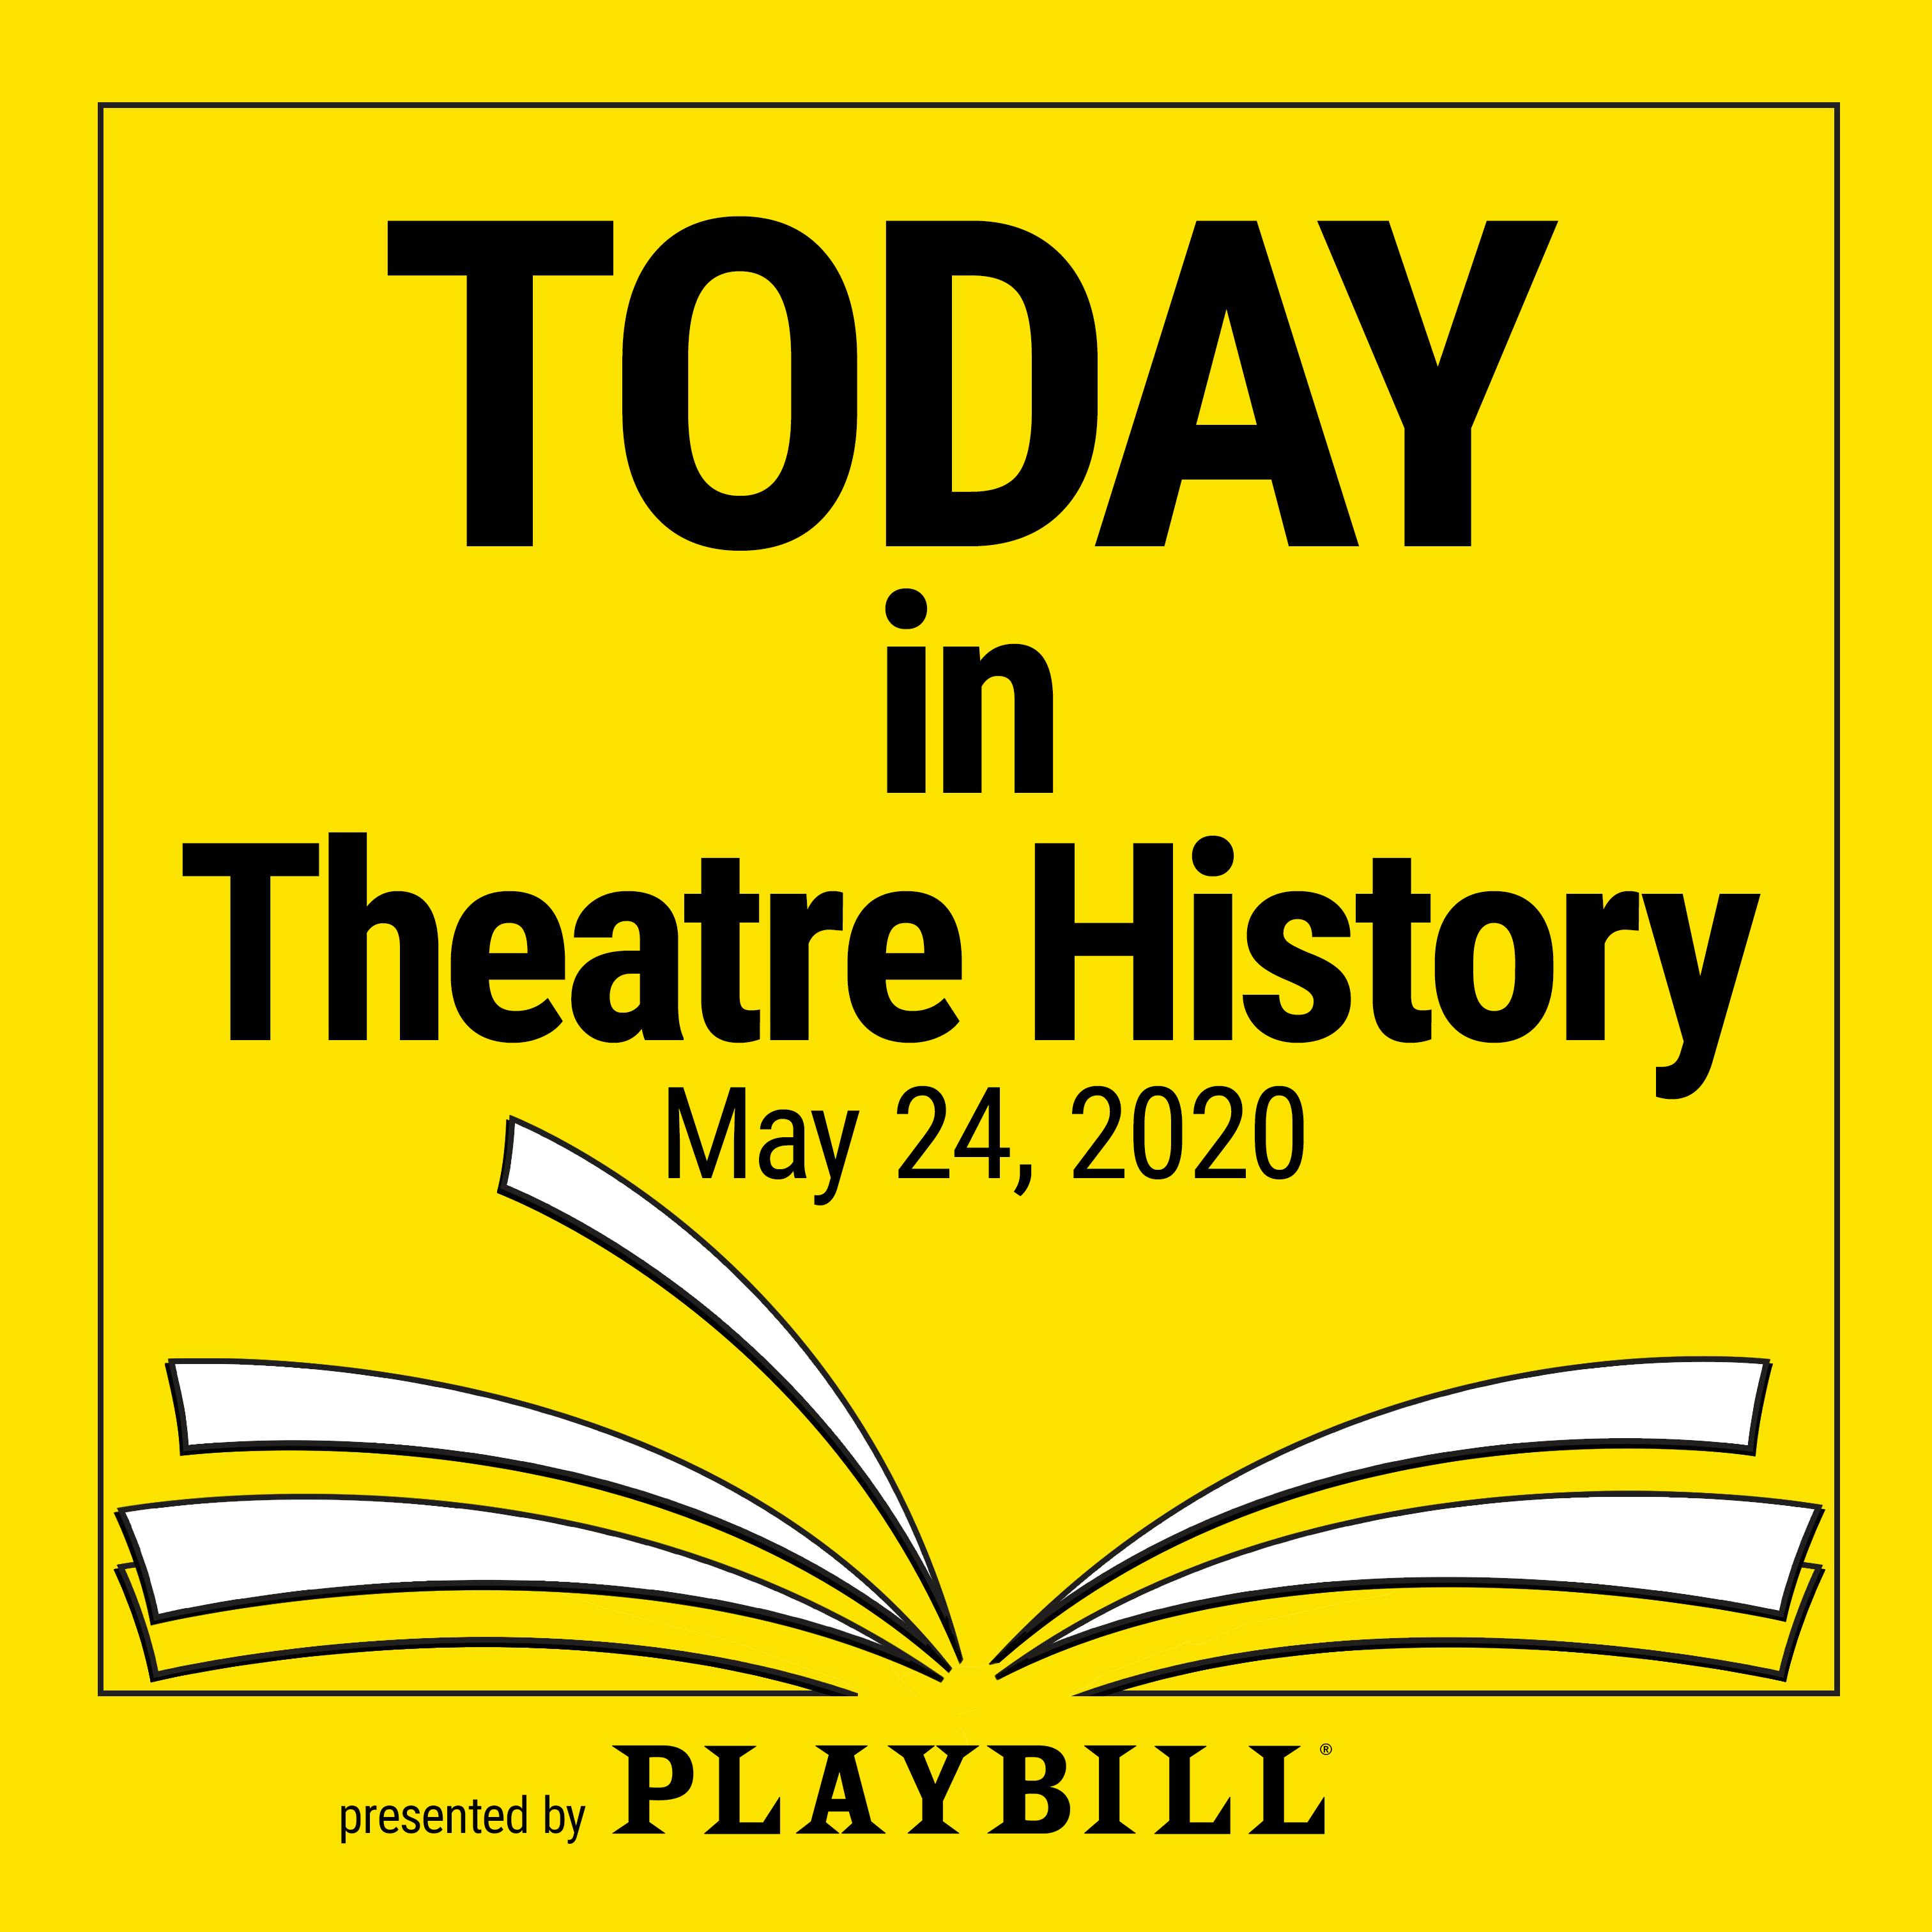 May 24, 2020: It’s Today! Mame, starring Angela Lansbury, opened in 1966.